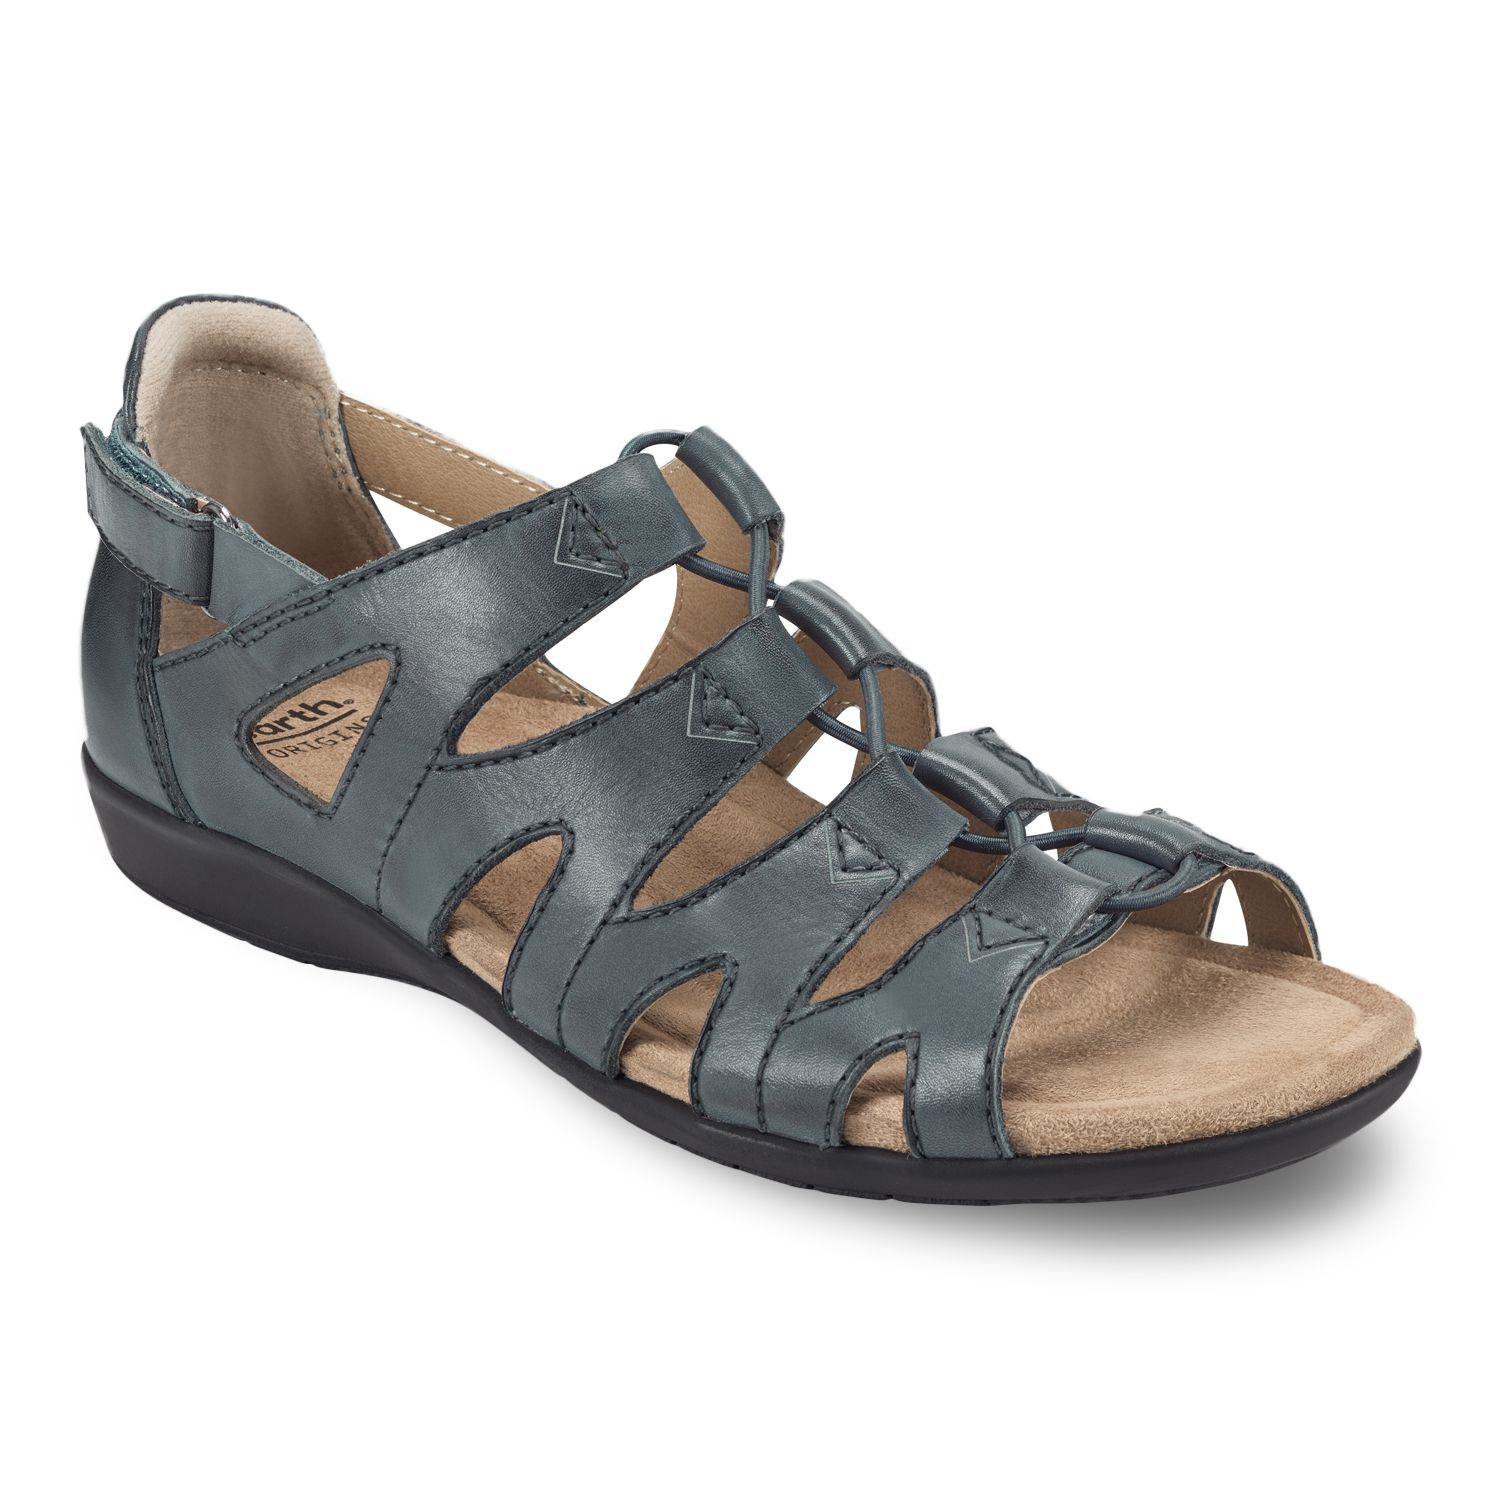 Image for Earth Origins Bea Women's Sandals at Kohl's.